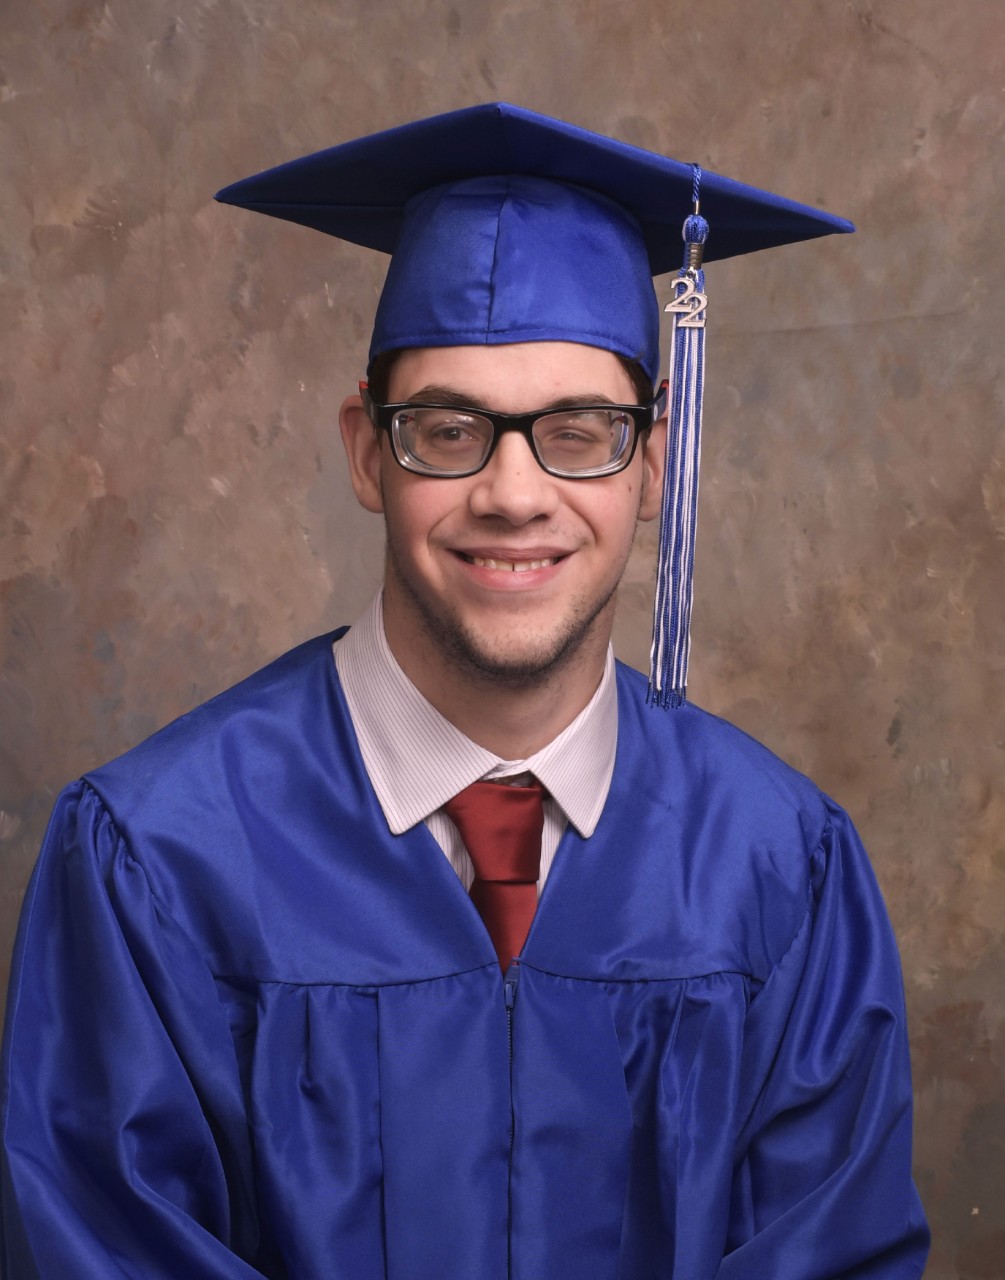 Middleton in his cap and gown